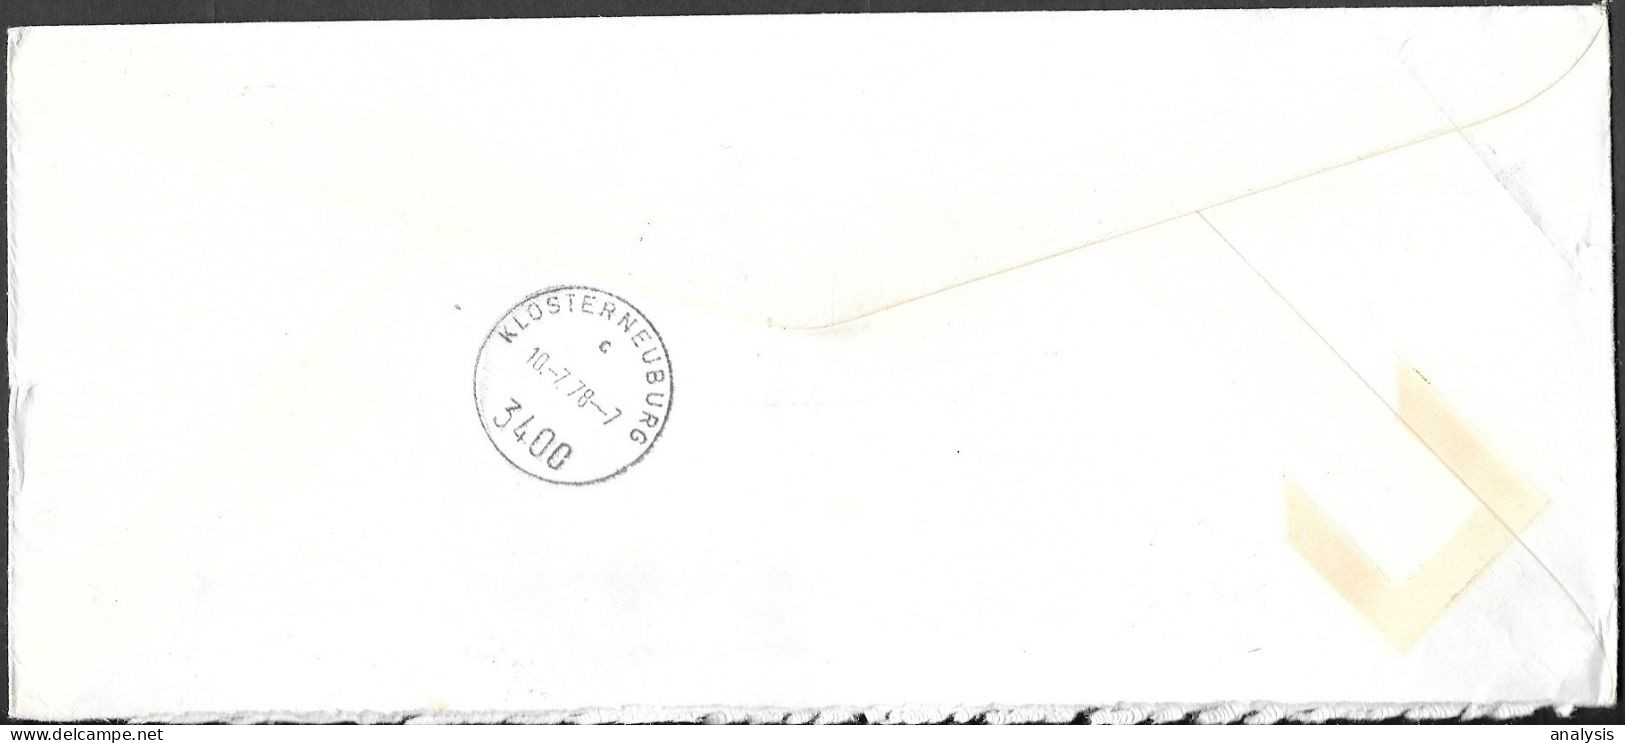 Argentina Registered Cover Mailed To Klosterneuburg Austria 1978. 1250P Rate Catedral De Salta Stamp - Covers & Documents